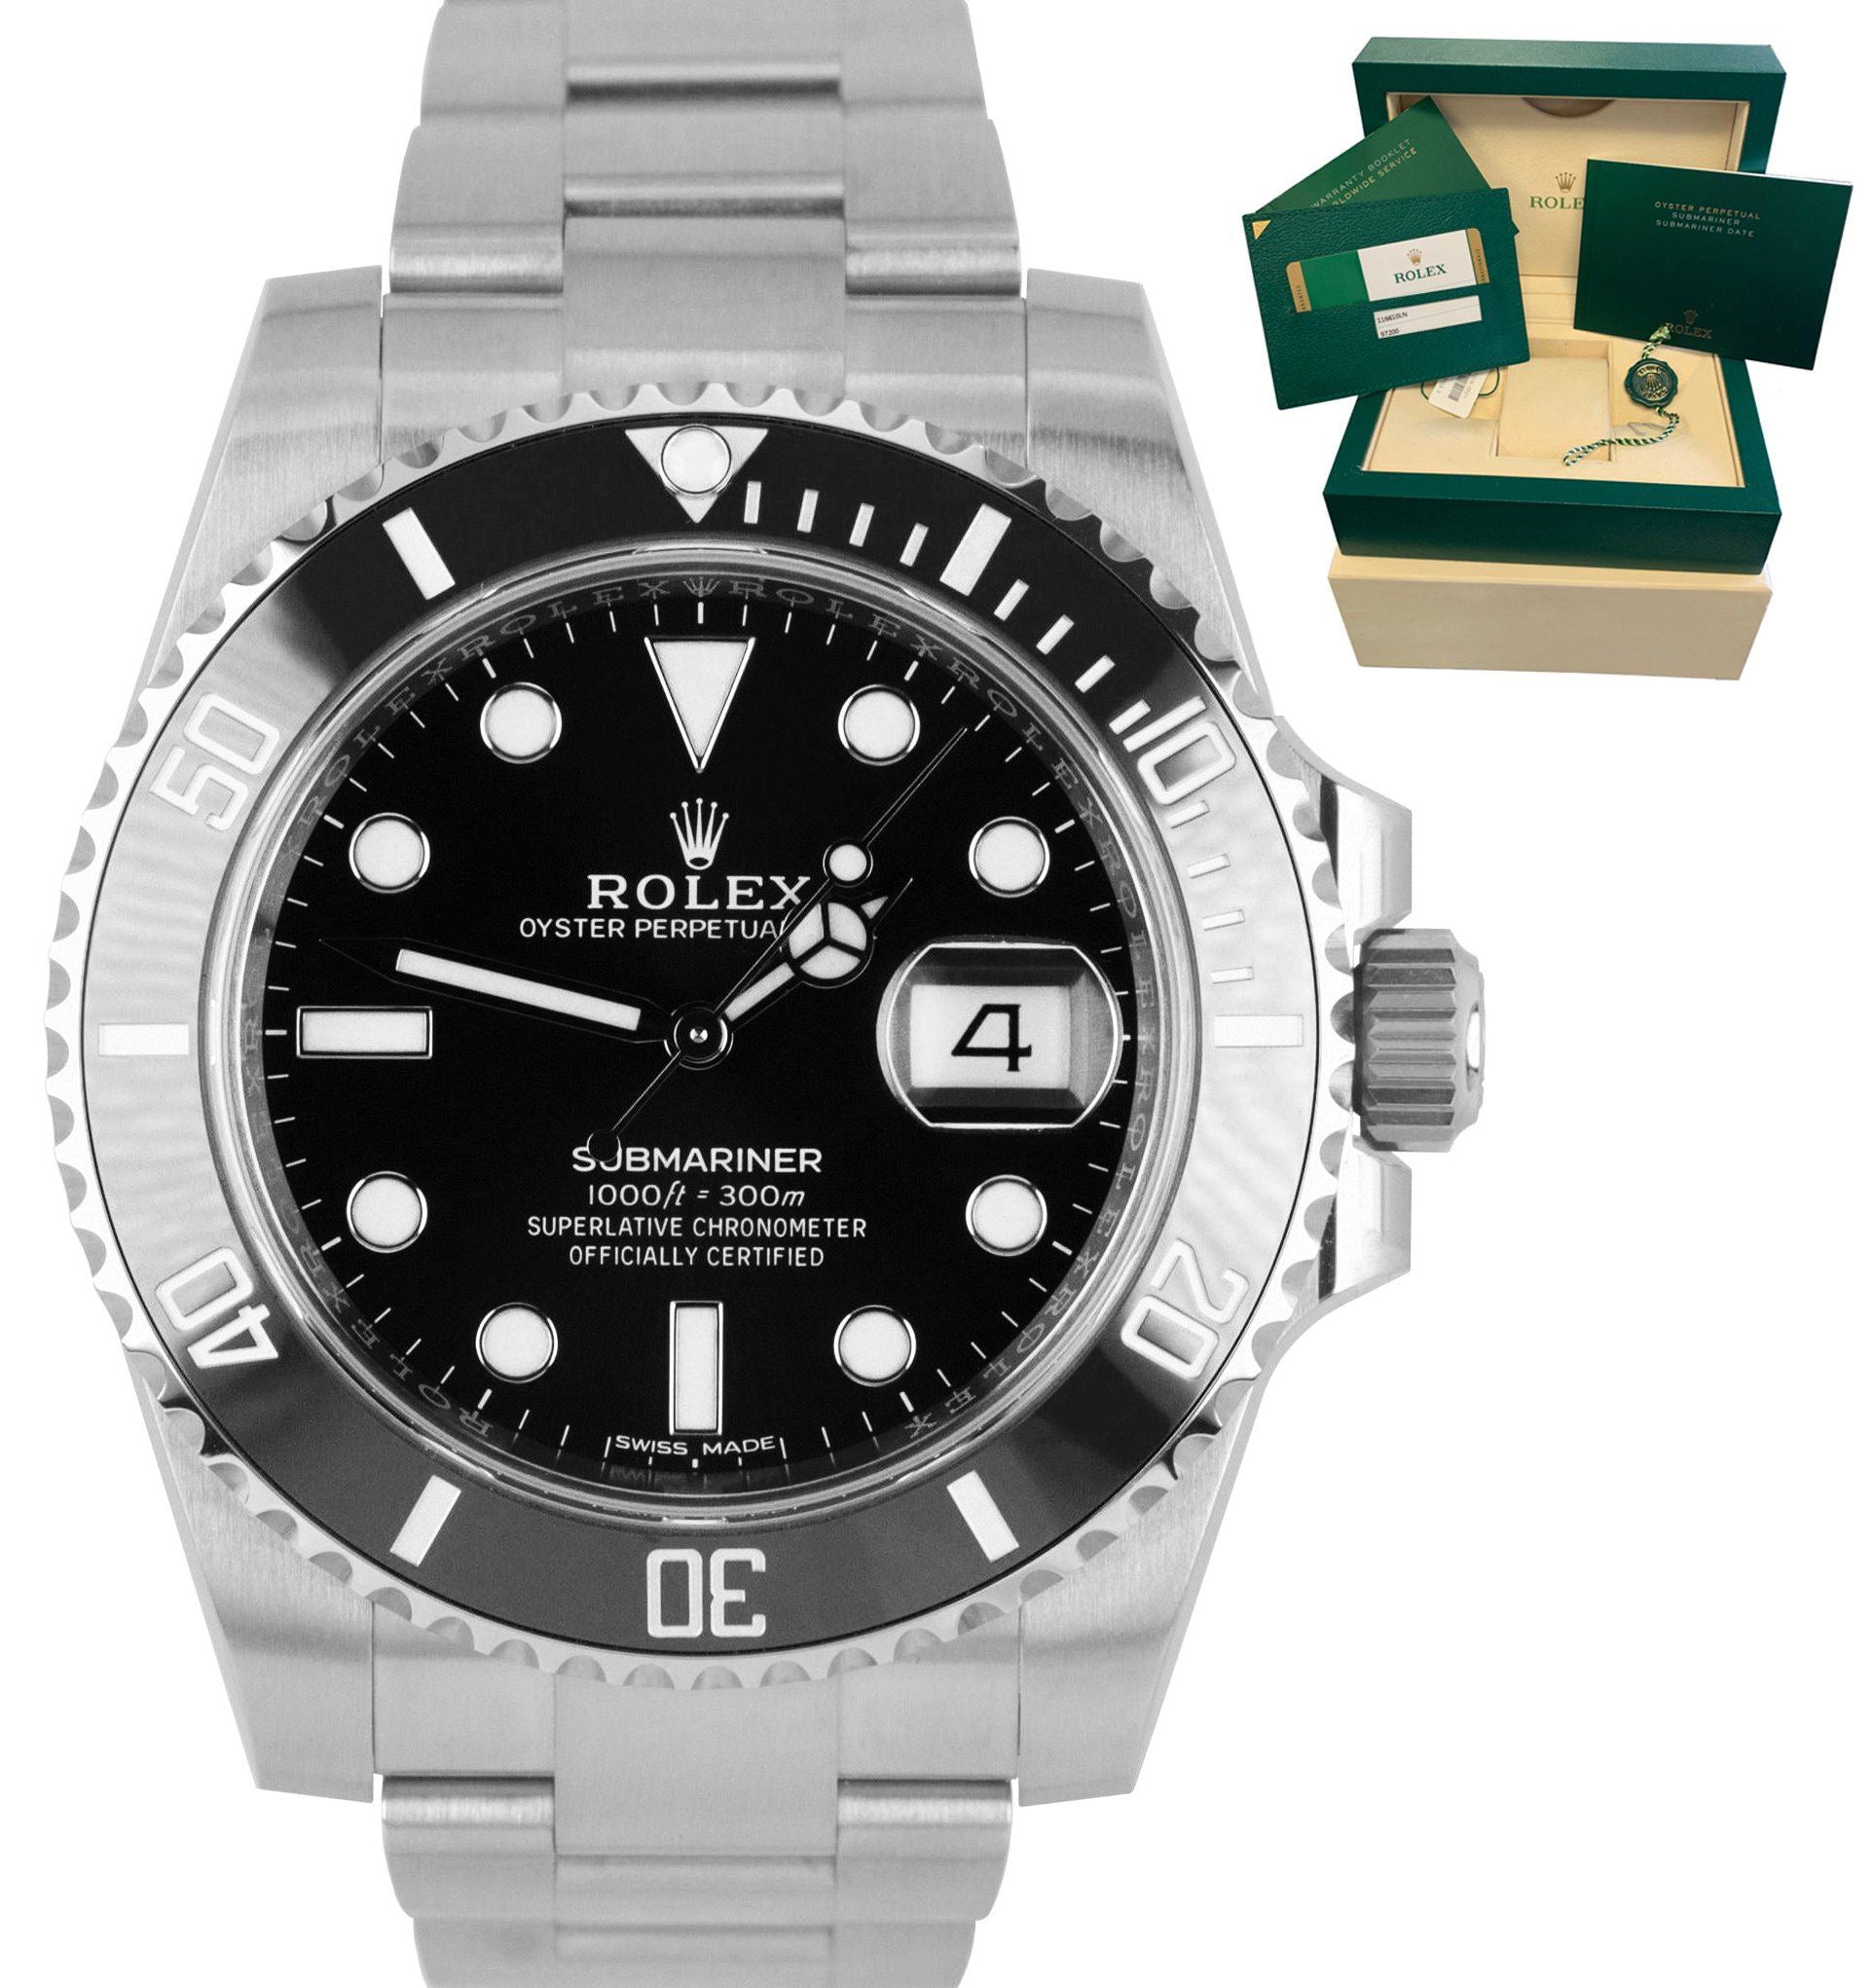 Rolex Oyster Perpetual Submariner date. Model 116610LN. 2018